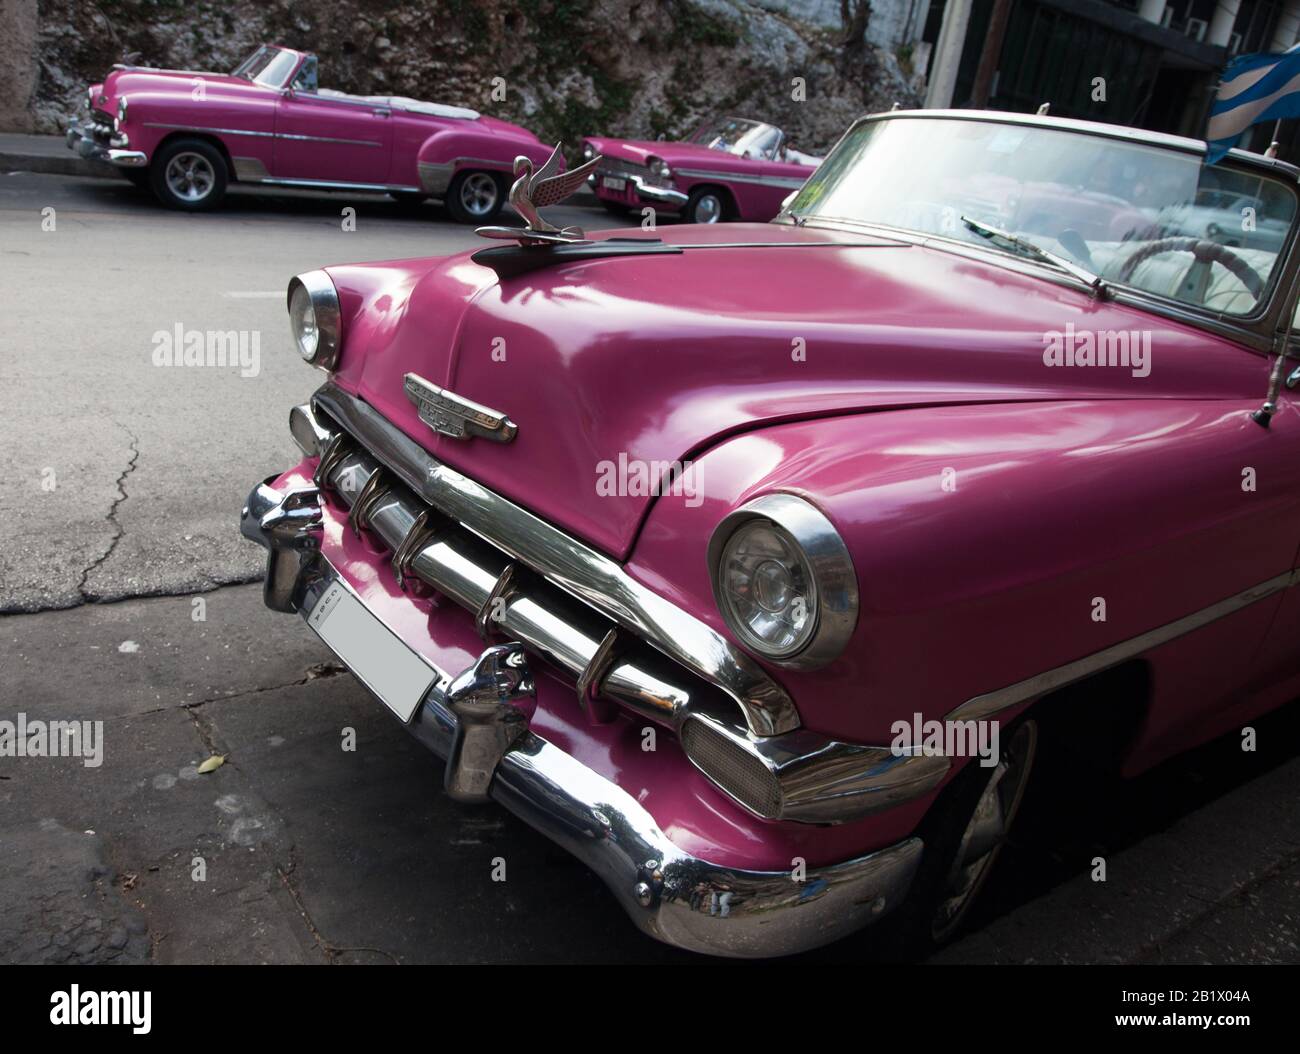 A group of three pink Chevrolet antique classic cars on a street in Cuba. Stock Photo